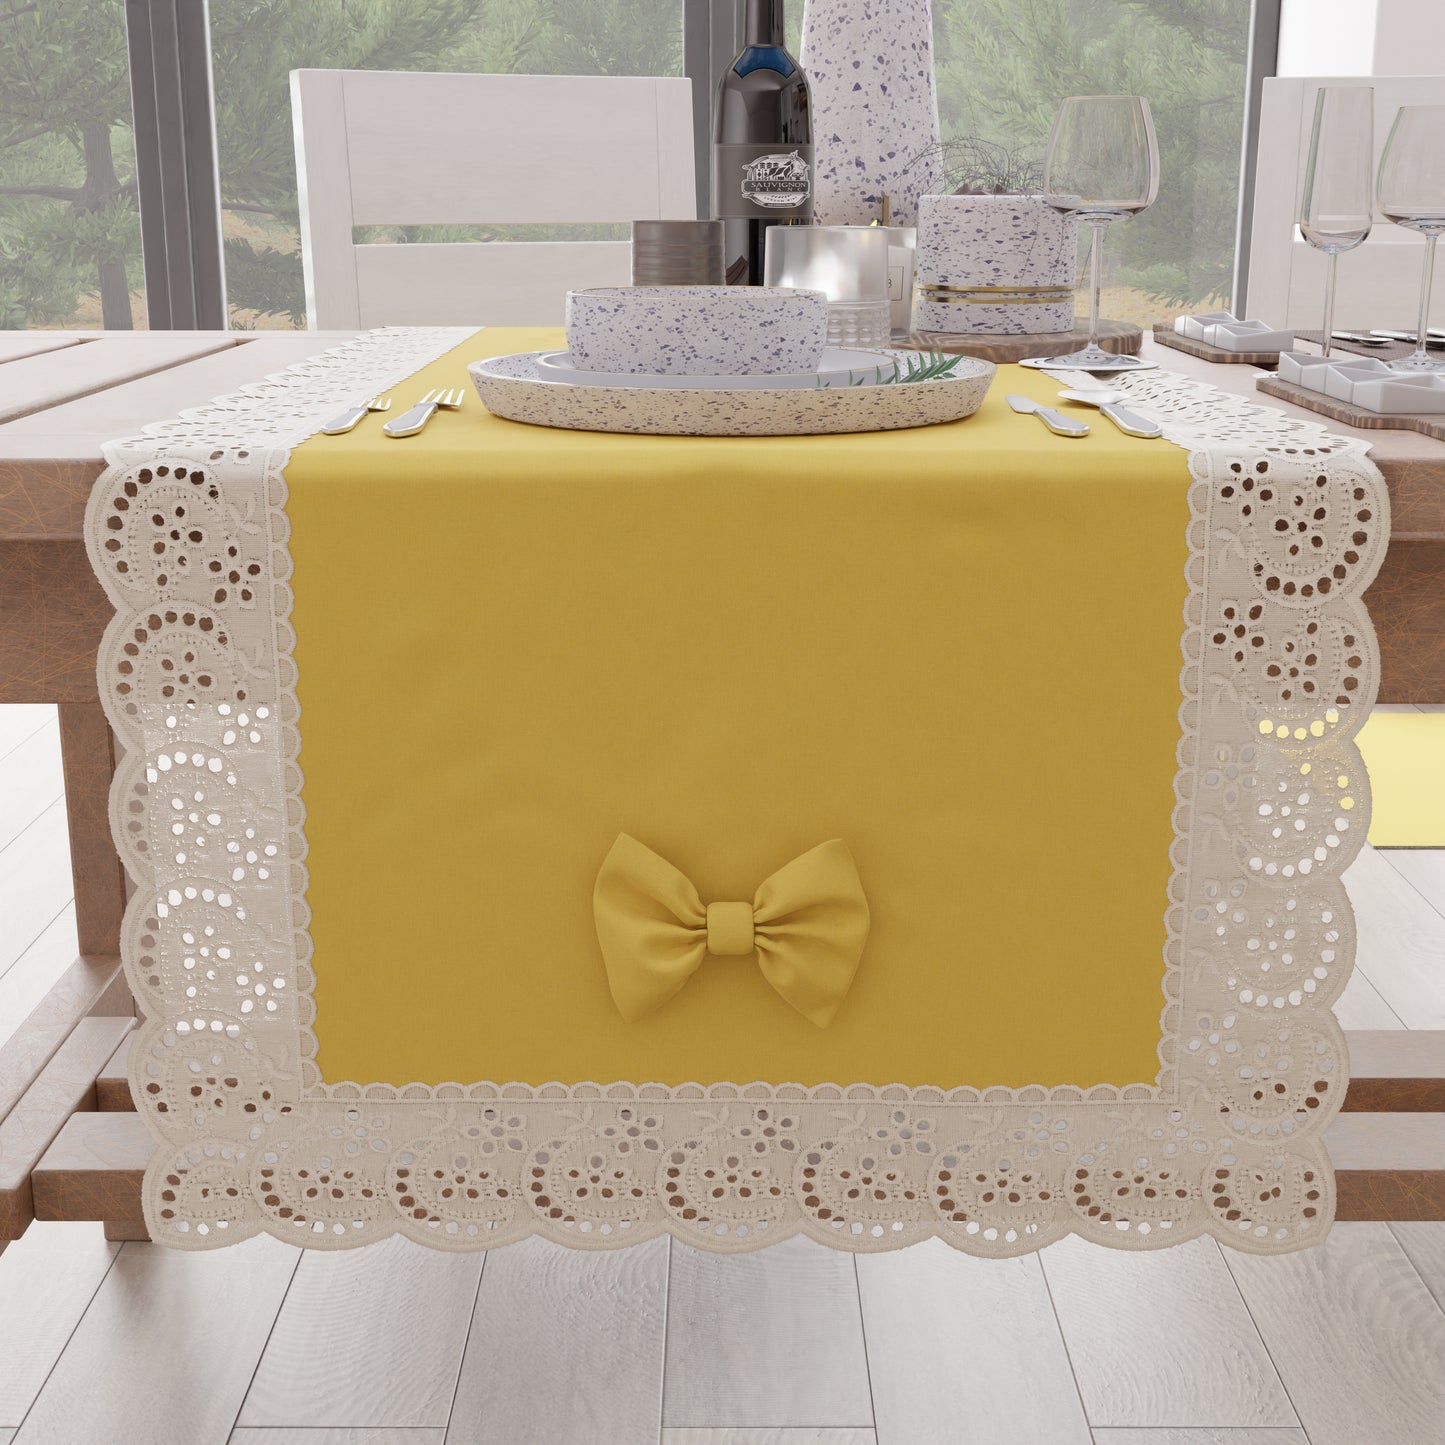 Elegant Shabby Chic Table Runner with Yellow Lace and Bows 